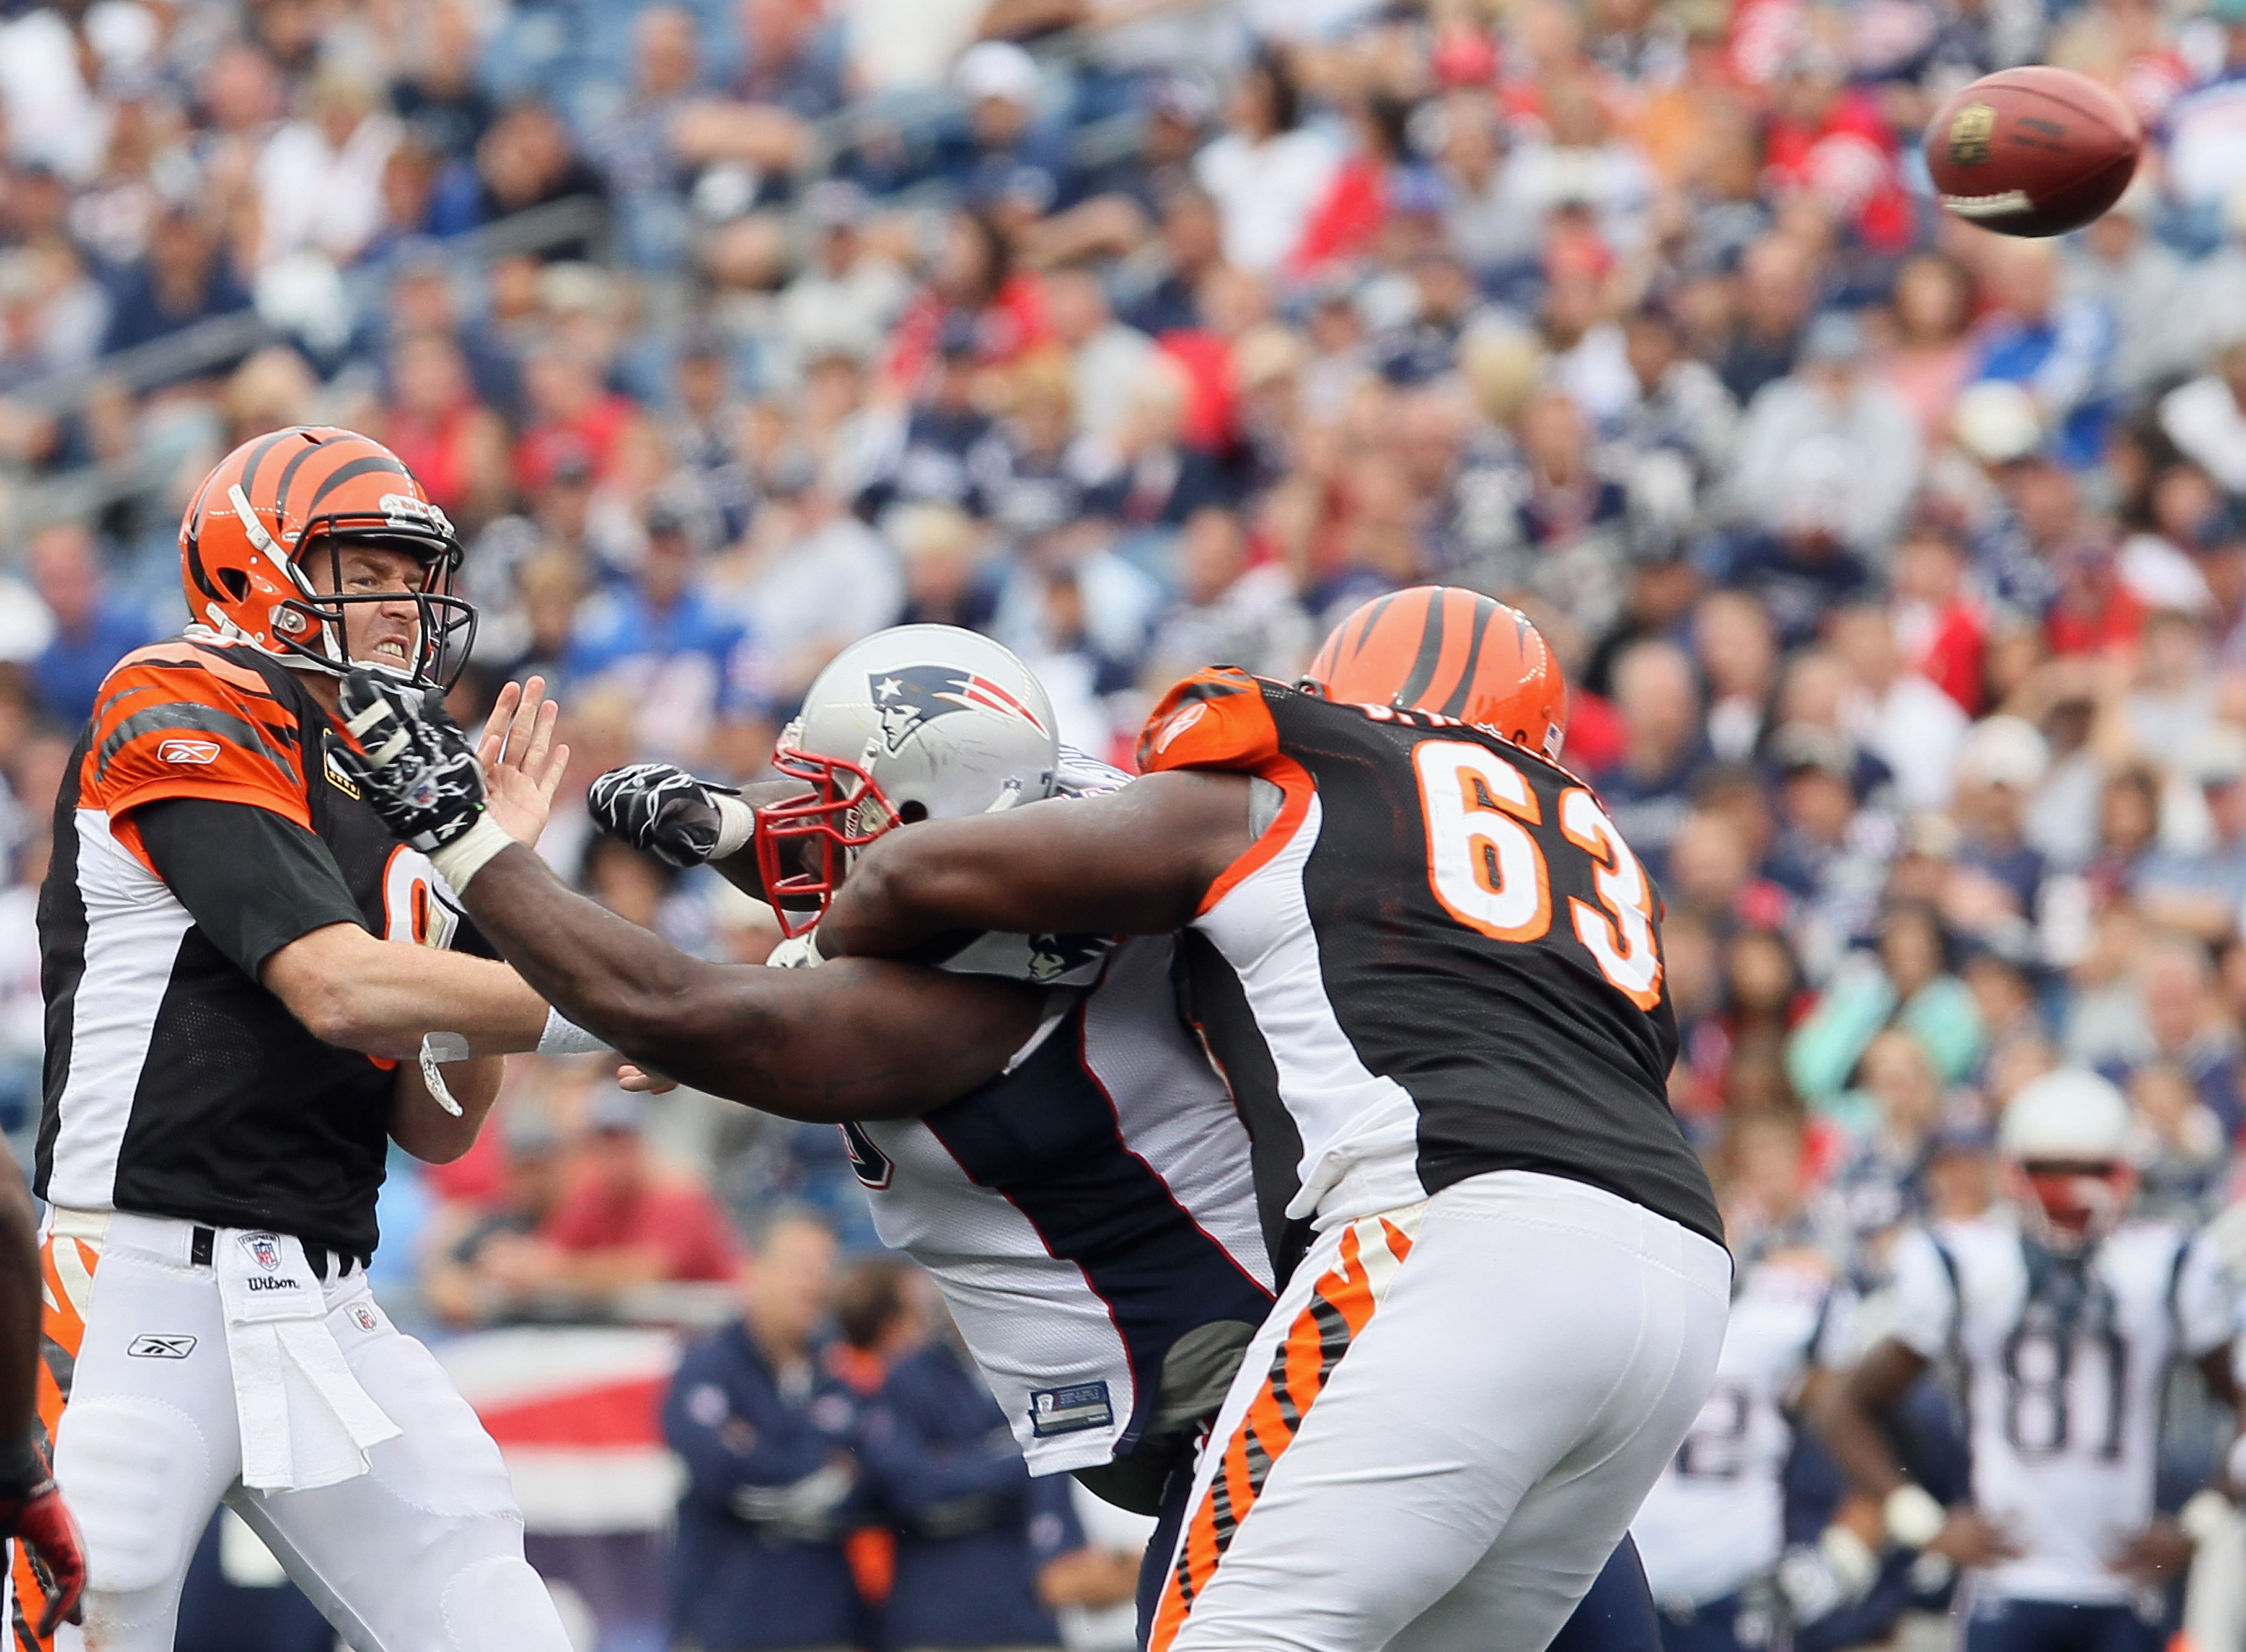 FOXBORO, MA - SEPTEMBER 12:  Carson Palmer #9 of the Cincinnati Bengals passes as teammate Bobbie Williams #63 holds off Vince Wilfork #75 of the New England Patriots during the NFL season opener on September 12, 2010 at Gillette Stadium in Foxboro, Massa